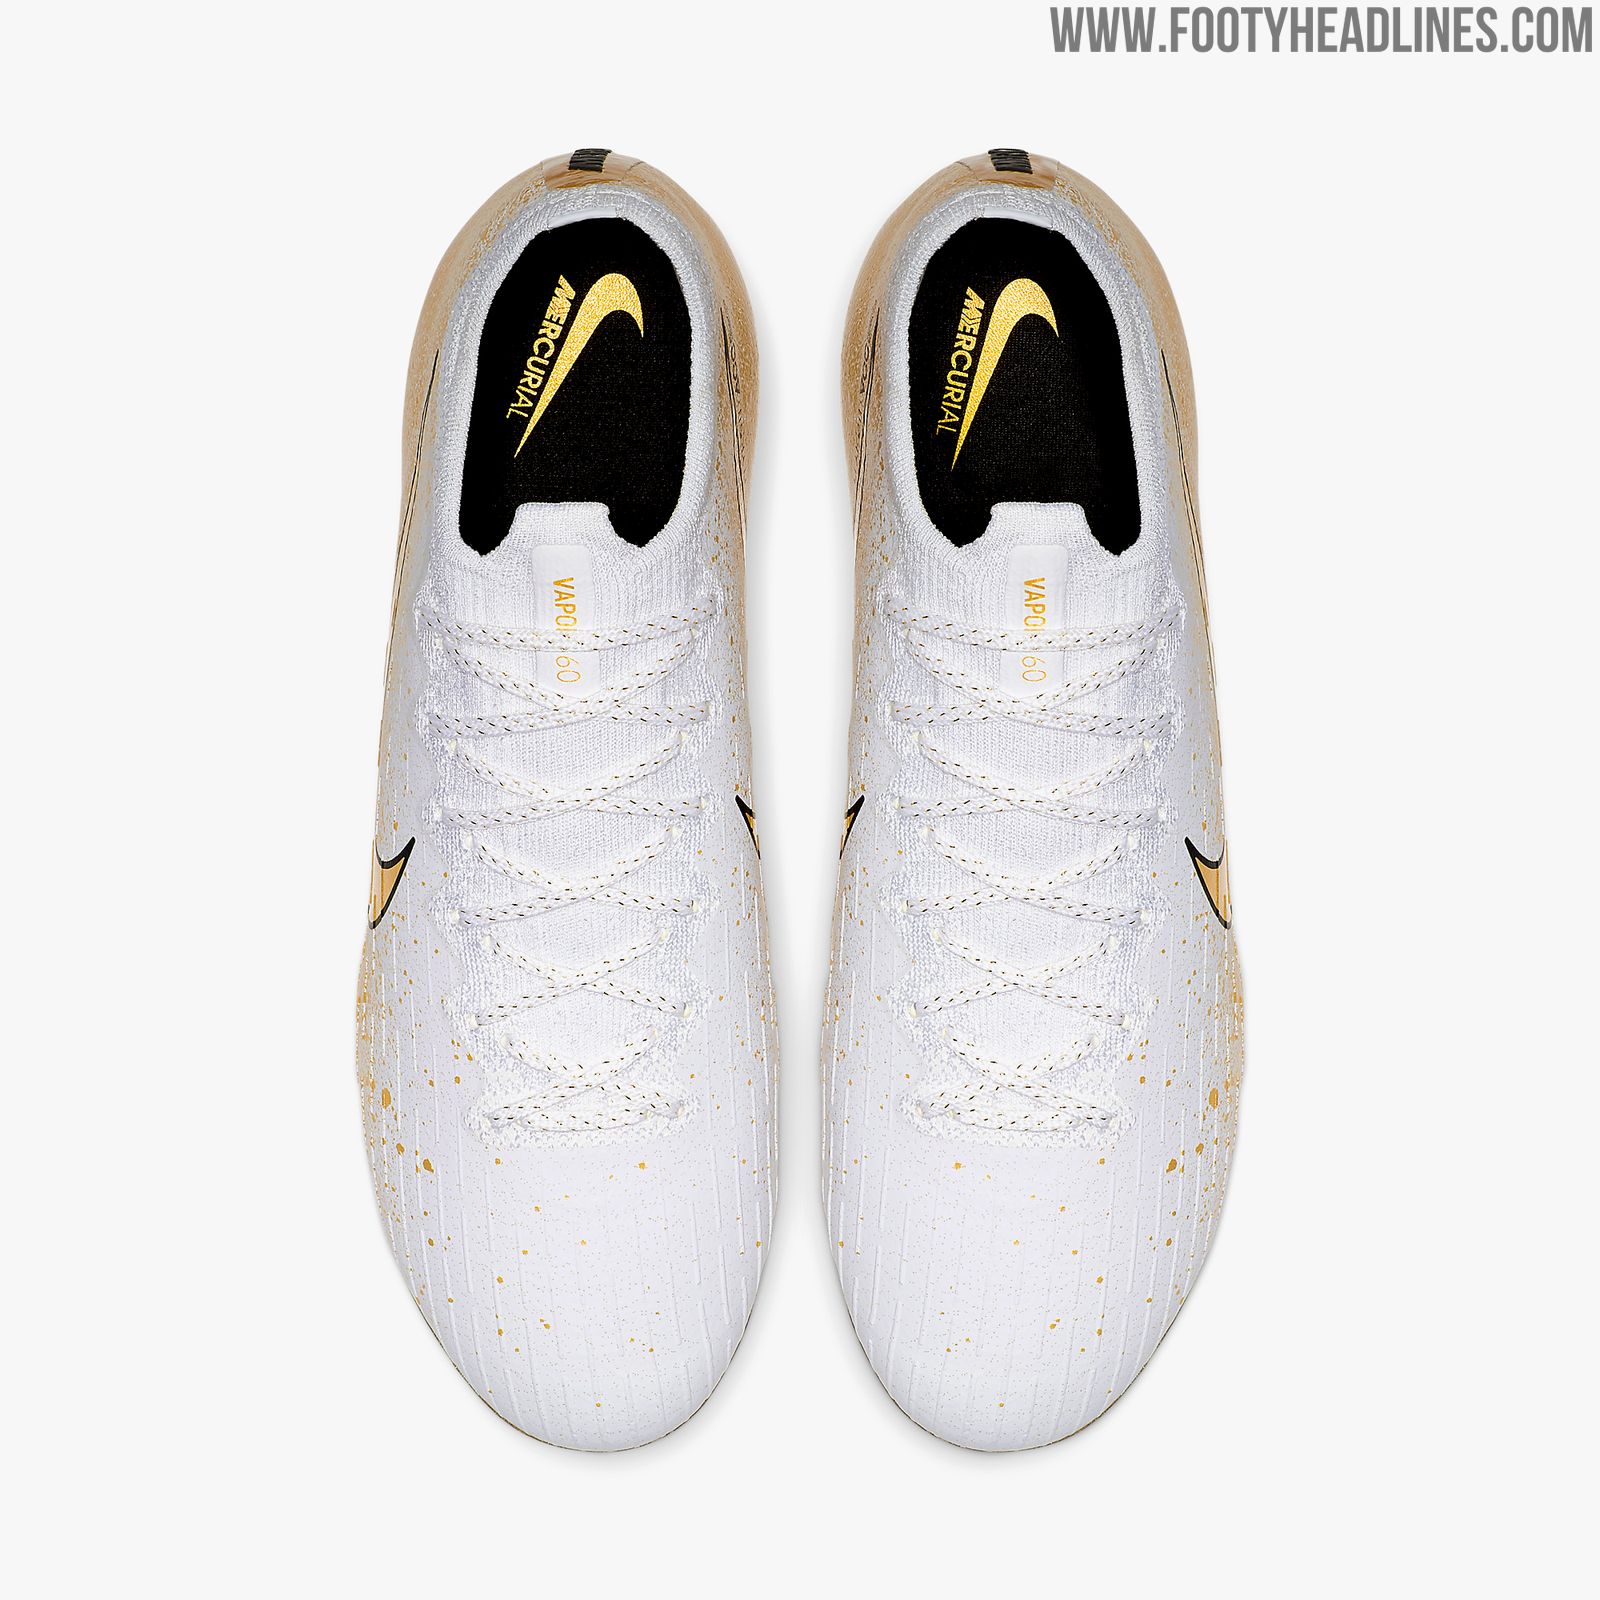 Nike Mercurial Vapor XII Euphoria Mode 'Champagne Gold' Limited-Edition ...